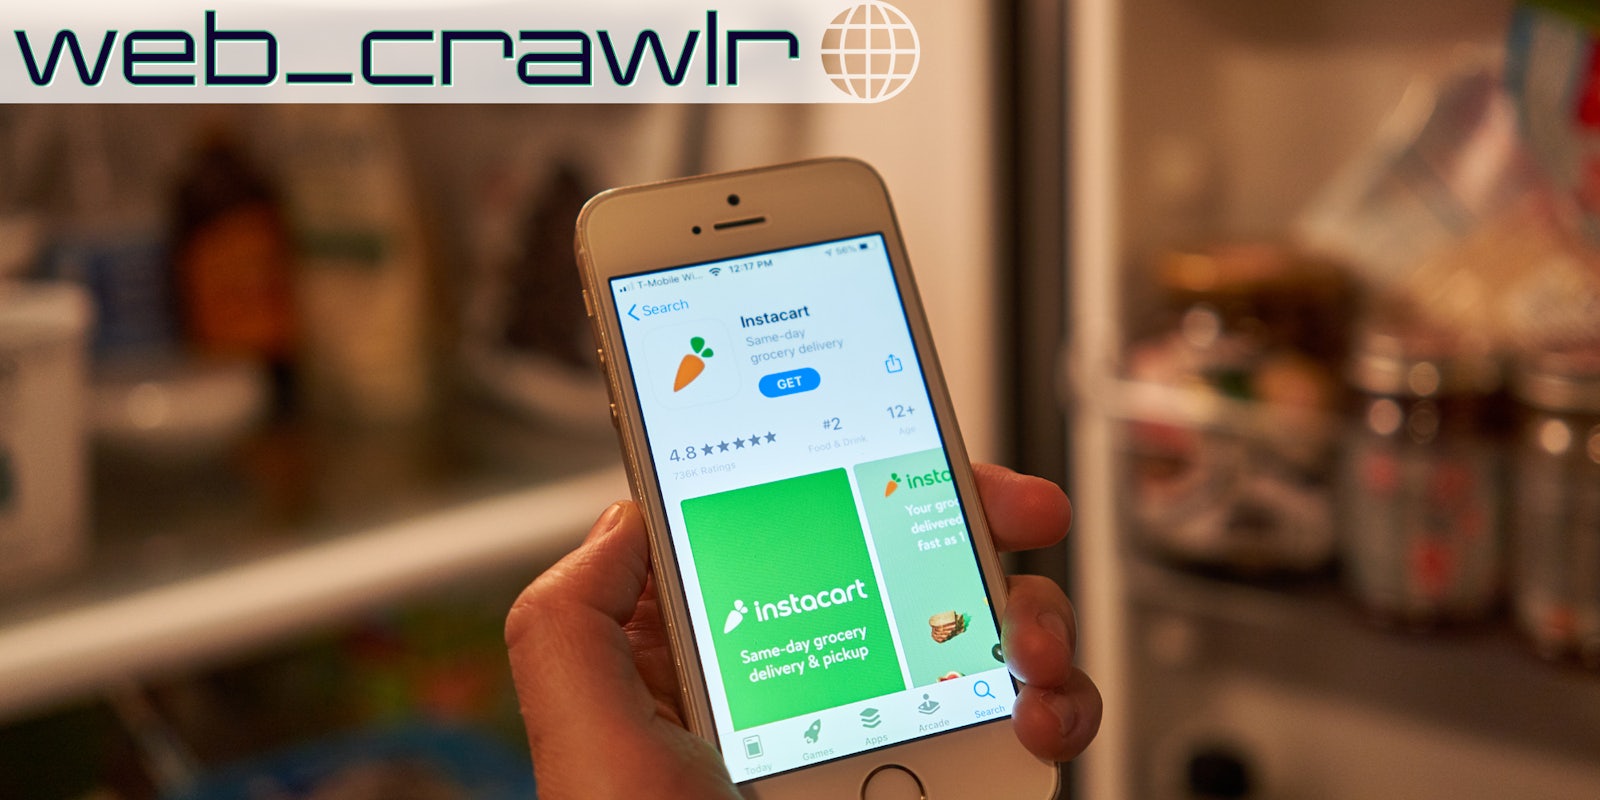 A person holding a phone with the Instacart app on it. The Daily Dot newsletter web_crawlr logo is in the top right corner.